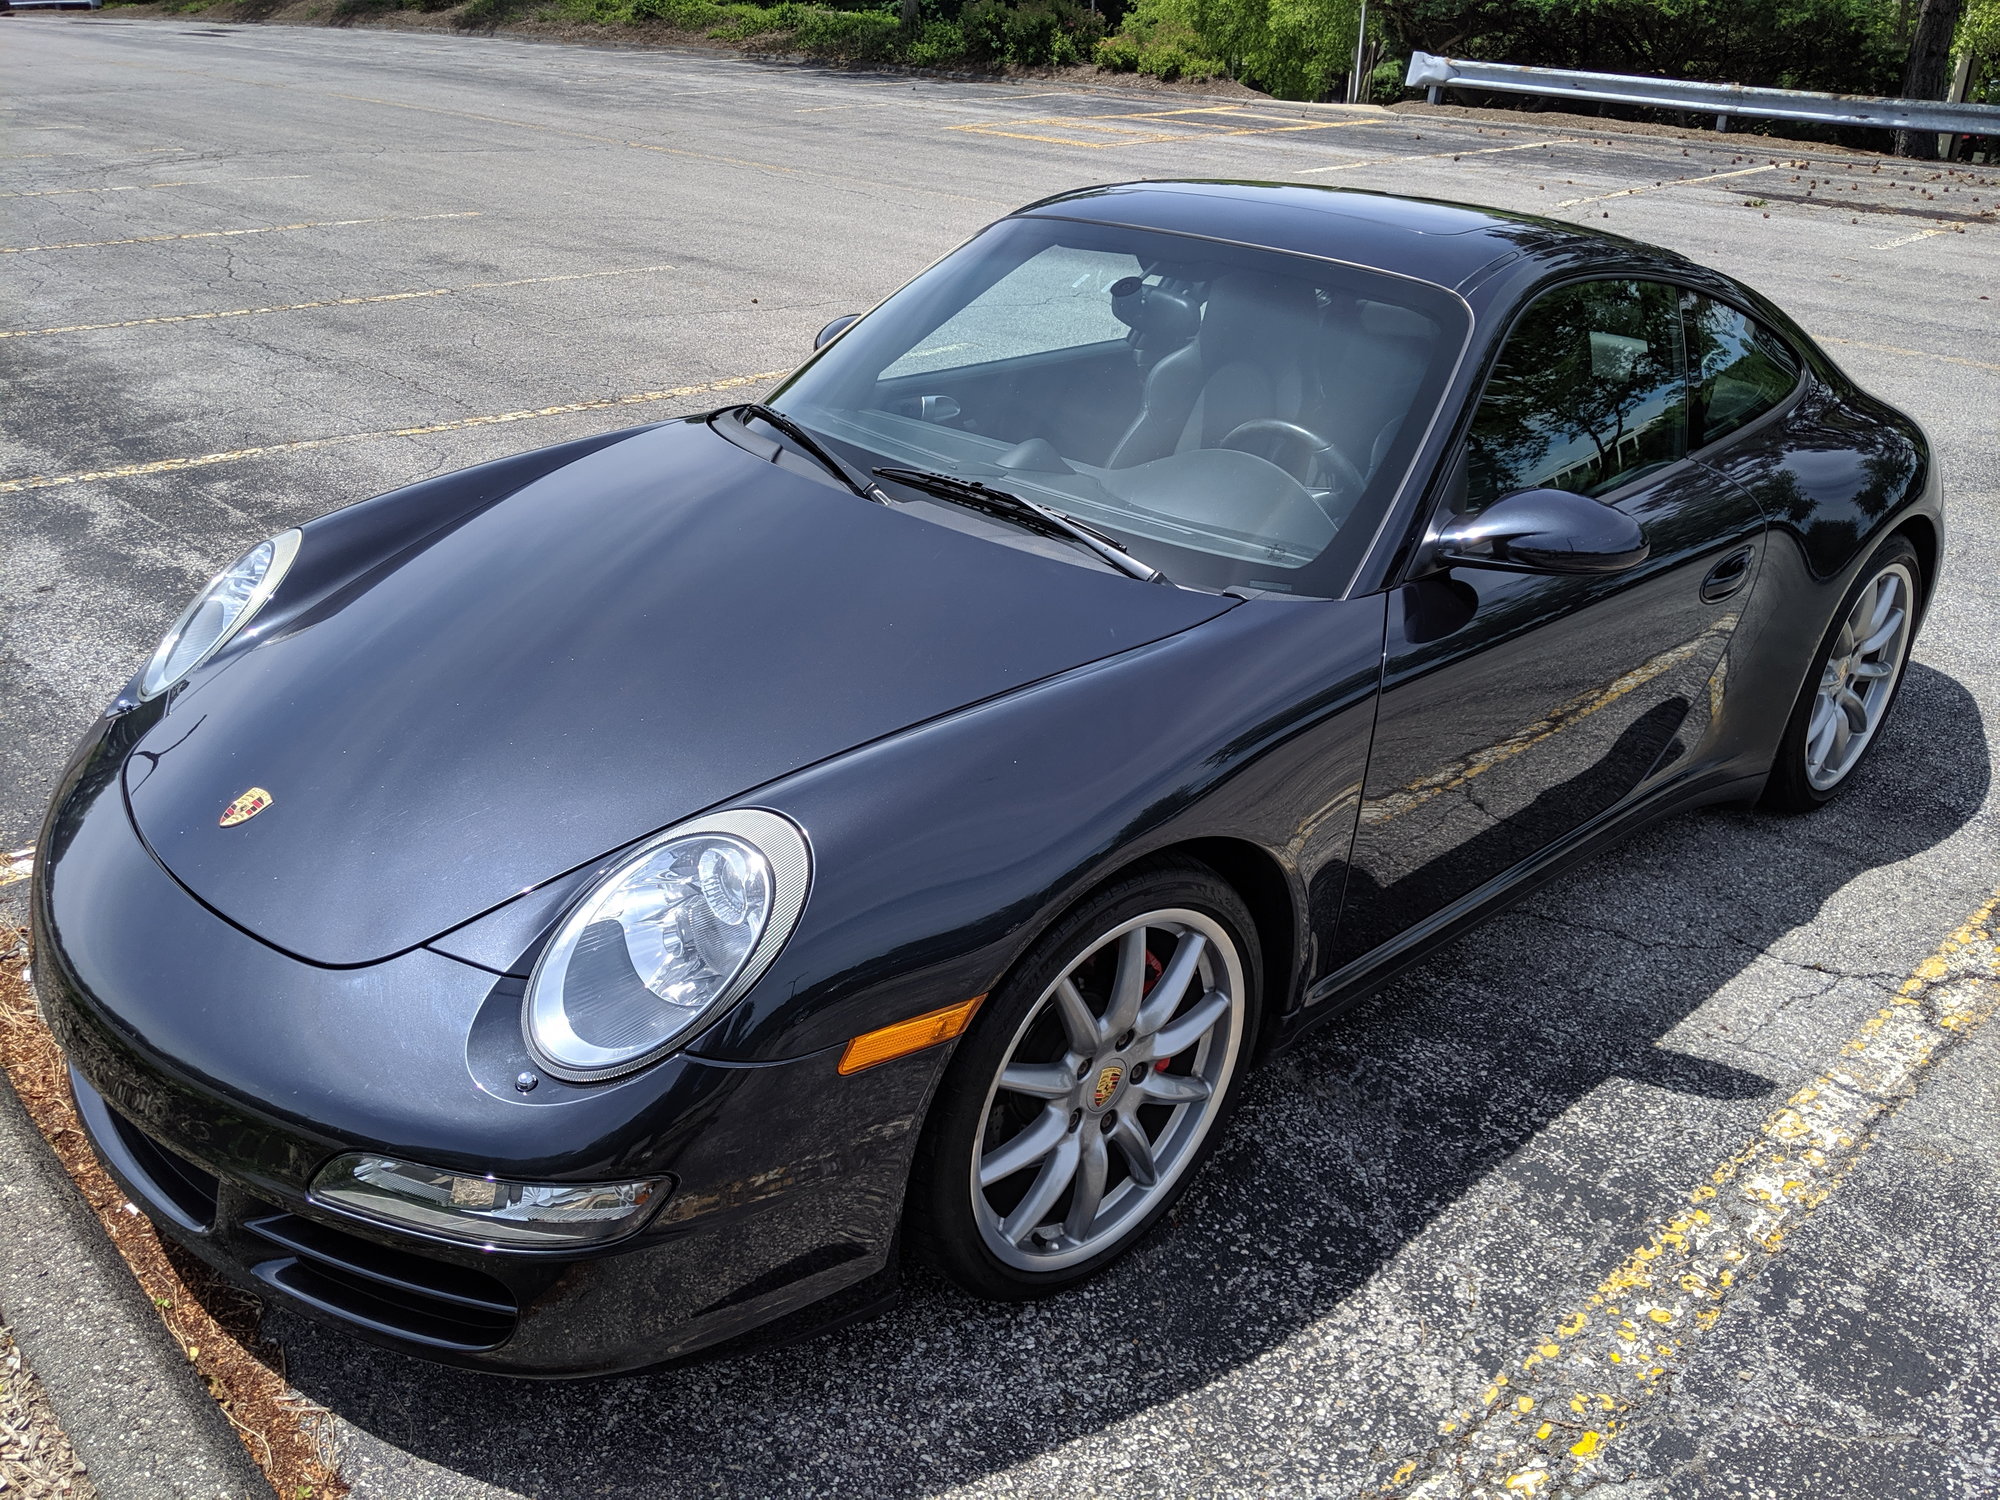 2006 Porsche 911 - 2006 Porsche 911 C4S (997.1) Highly optioned, Atlas Grey. Stock, Excellent condition. - Used - VIN WP0AB29936S743650 - 63,000 Miles - 6 cyl - AWD - Manual - Coupe - Gray - Wilton, CT 06897, United States